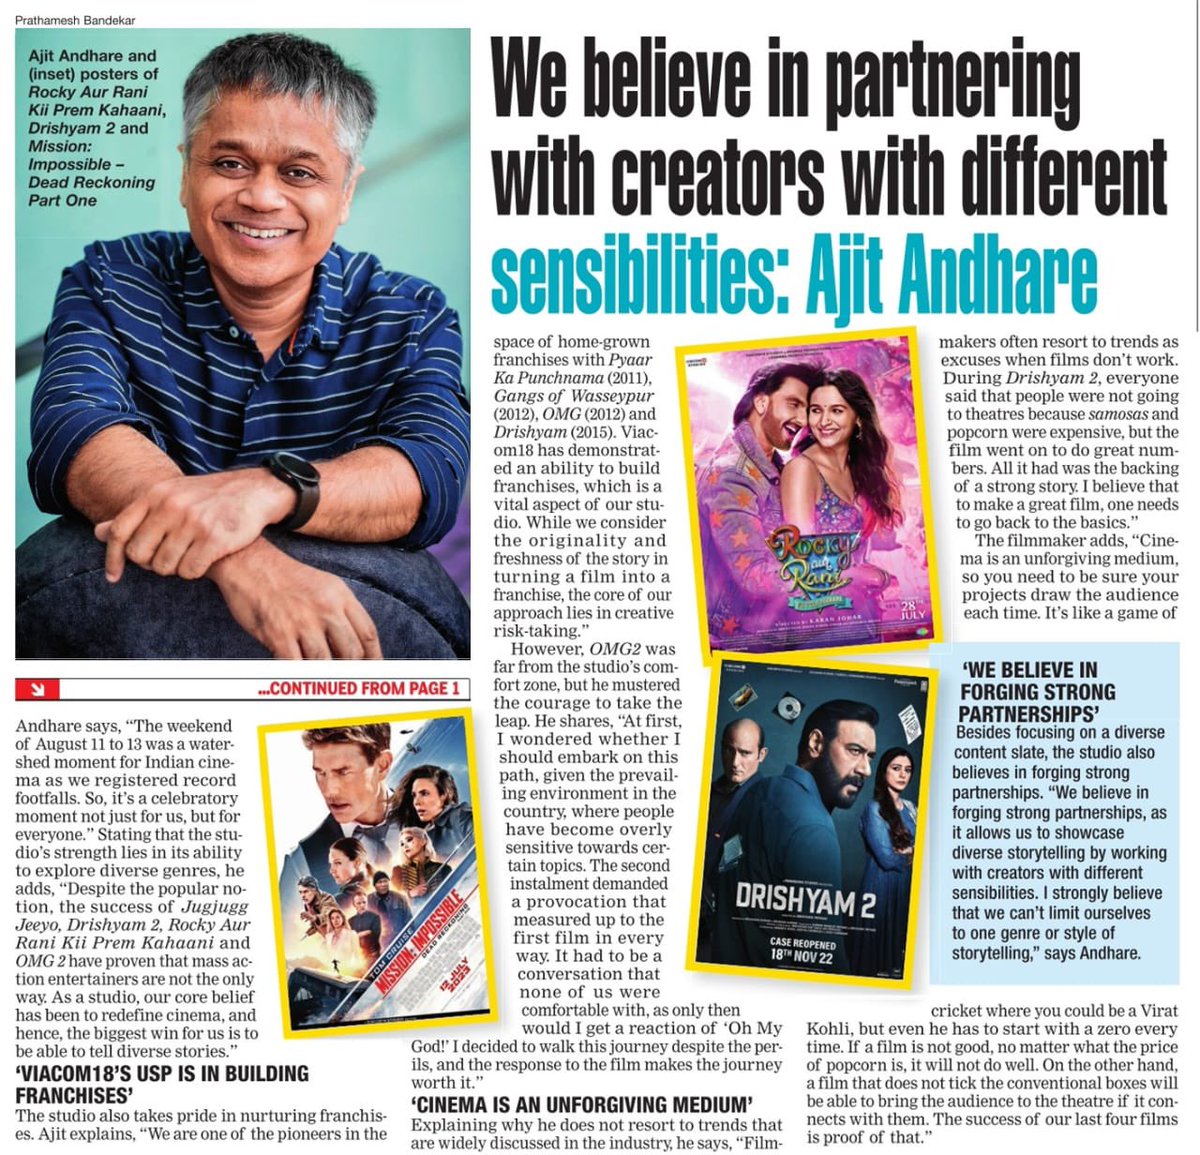 “Redefining cinema has been our core belief” - @AndhareAjit discusses the wave of success and creating franchises with @bombaytimes #Viacom18Studios